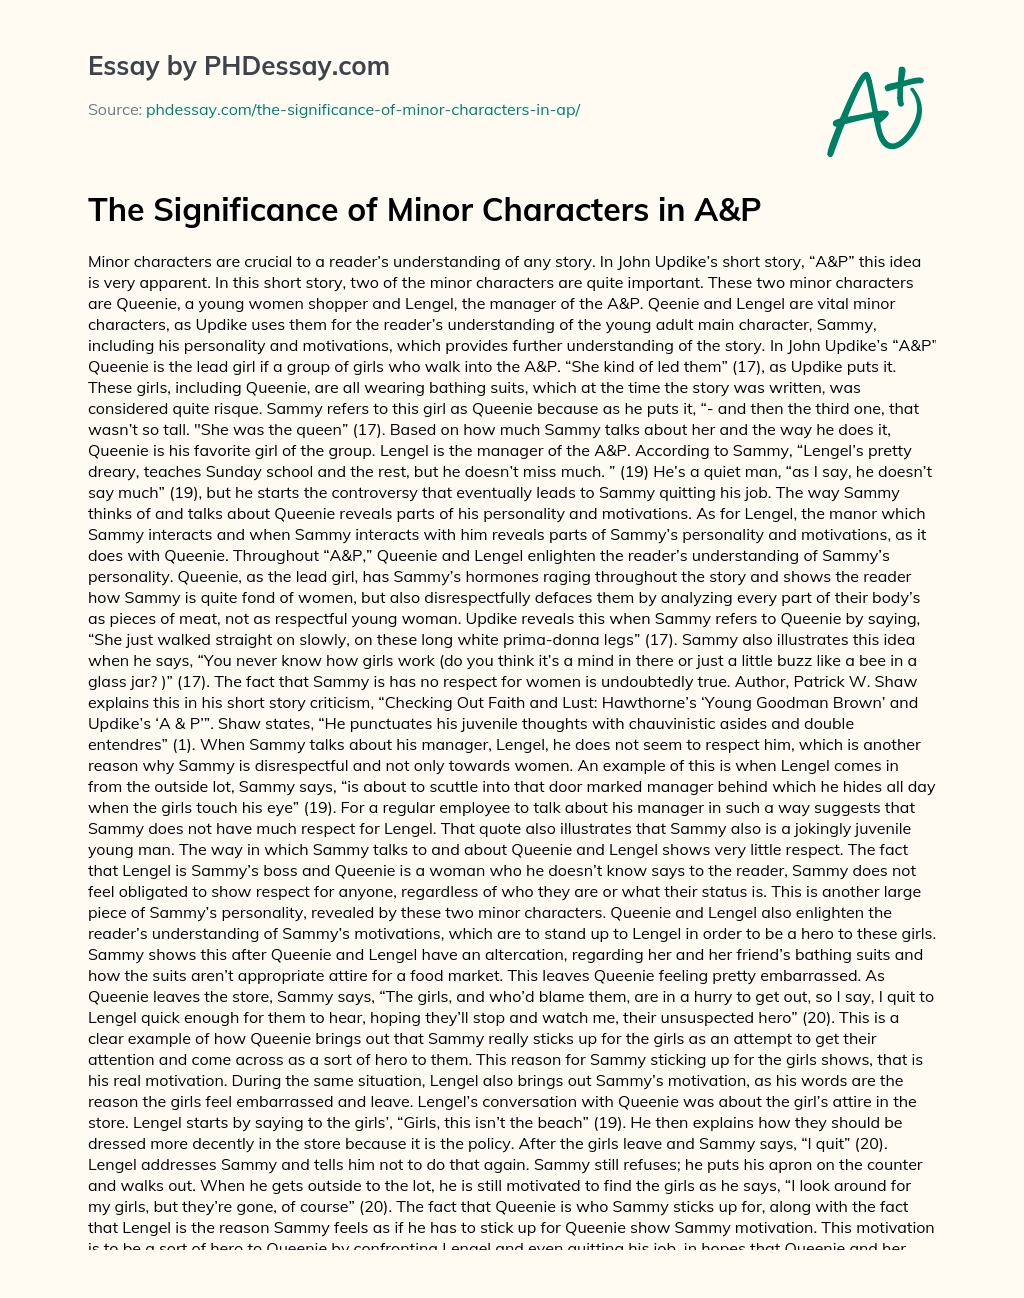 The Significance of Minor Characters in A&P essay